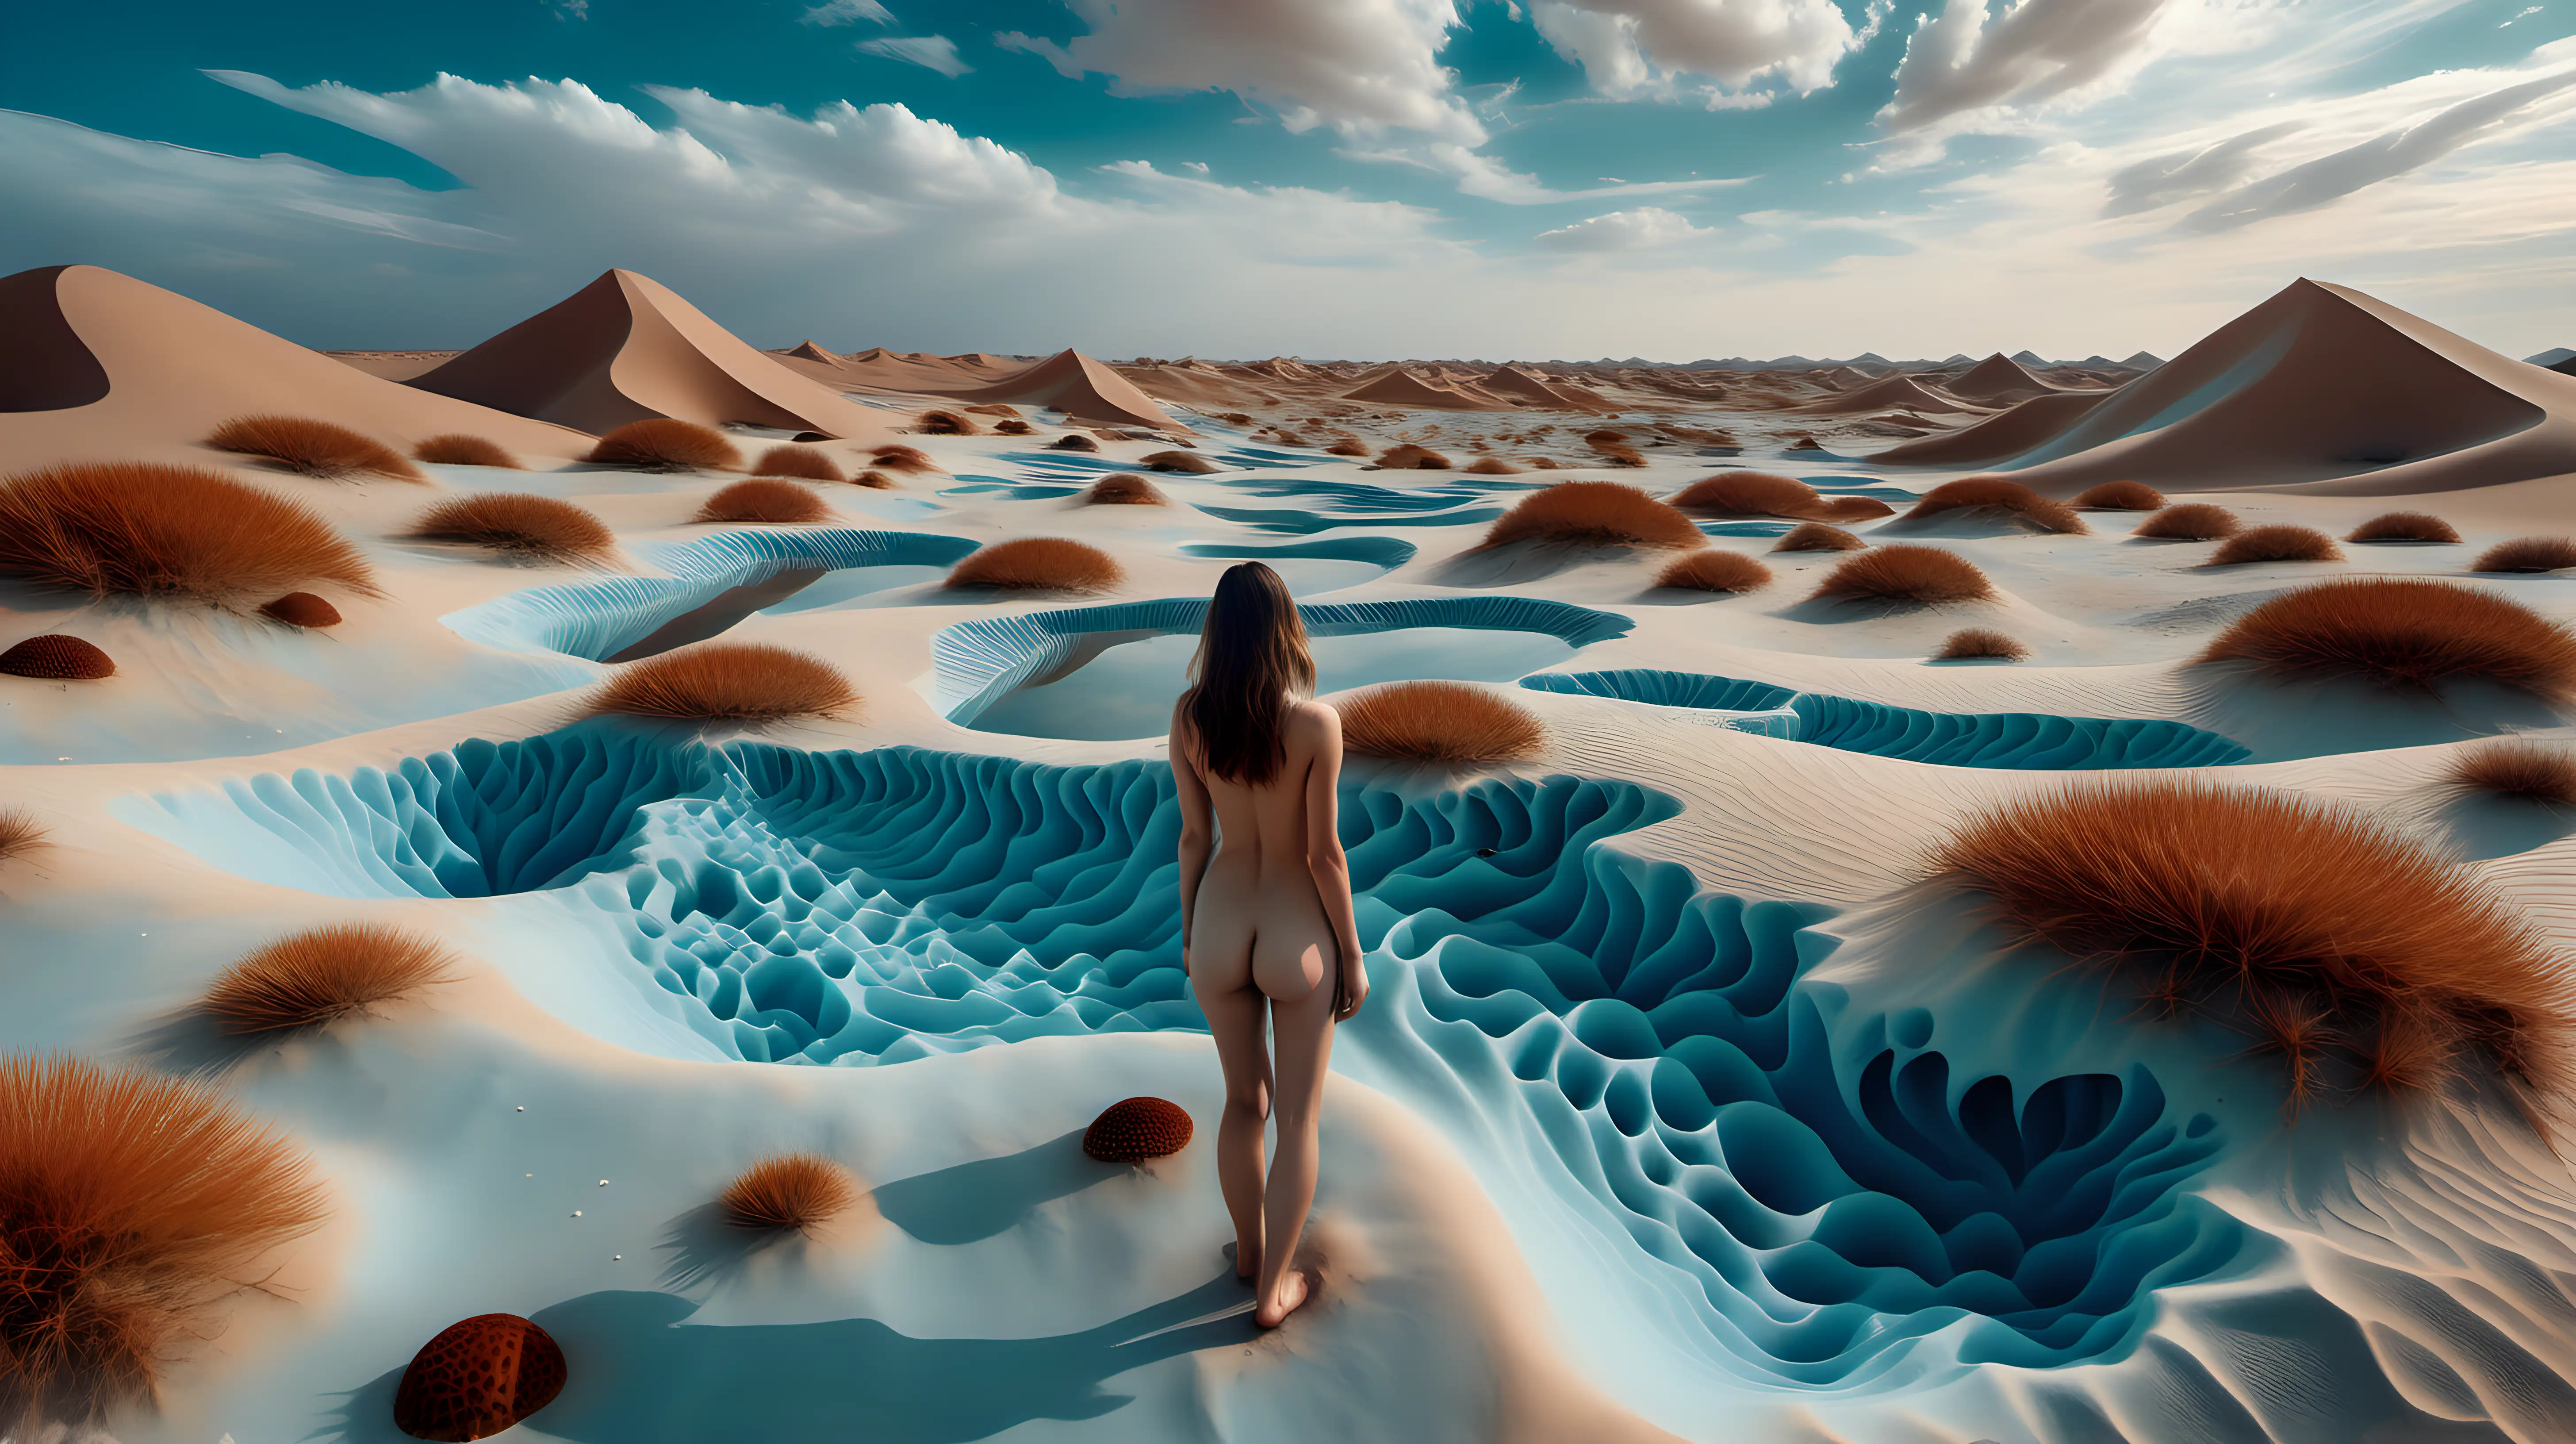 Enchanting Nude Woman in Psychedelic Crystal Landscape